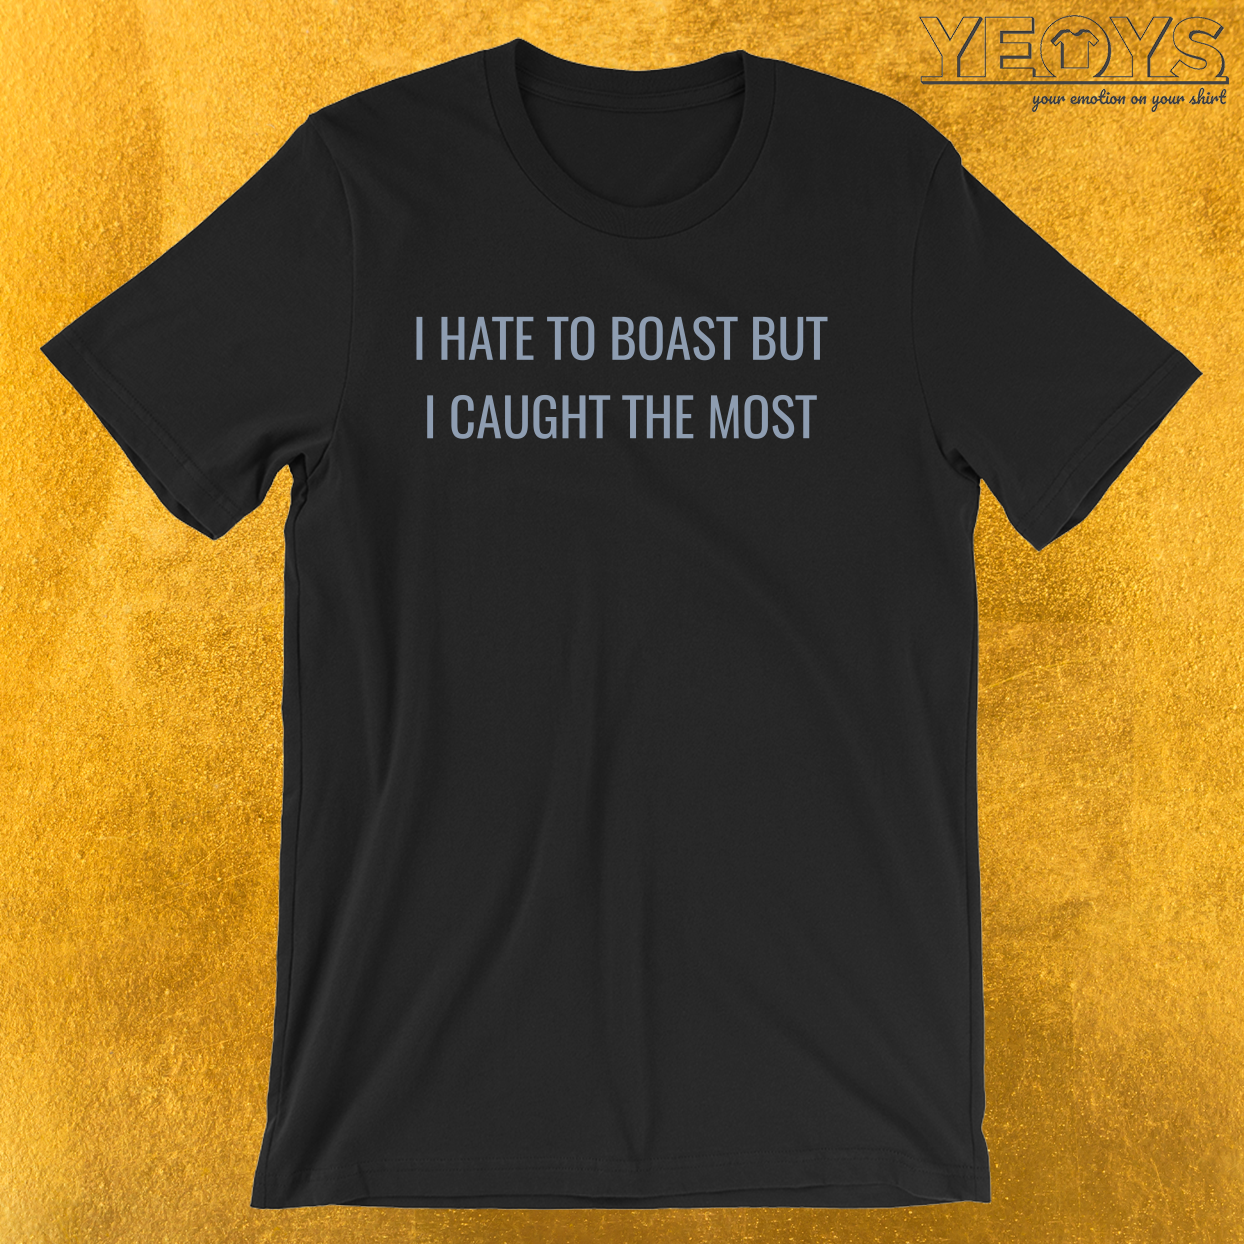 I Hate To Boast But I Caught The Most – Funny Fishing Tee